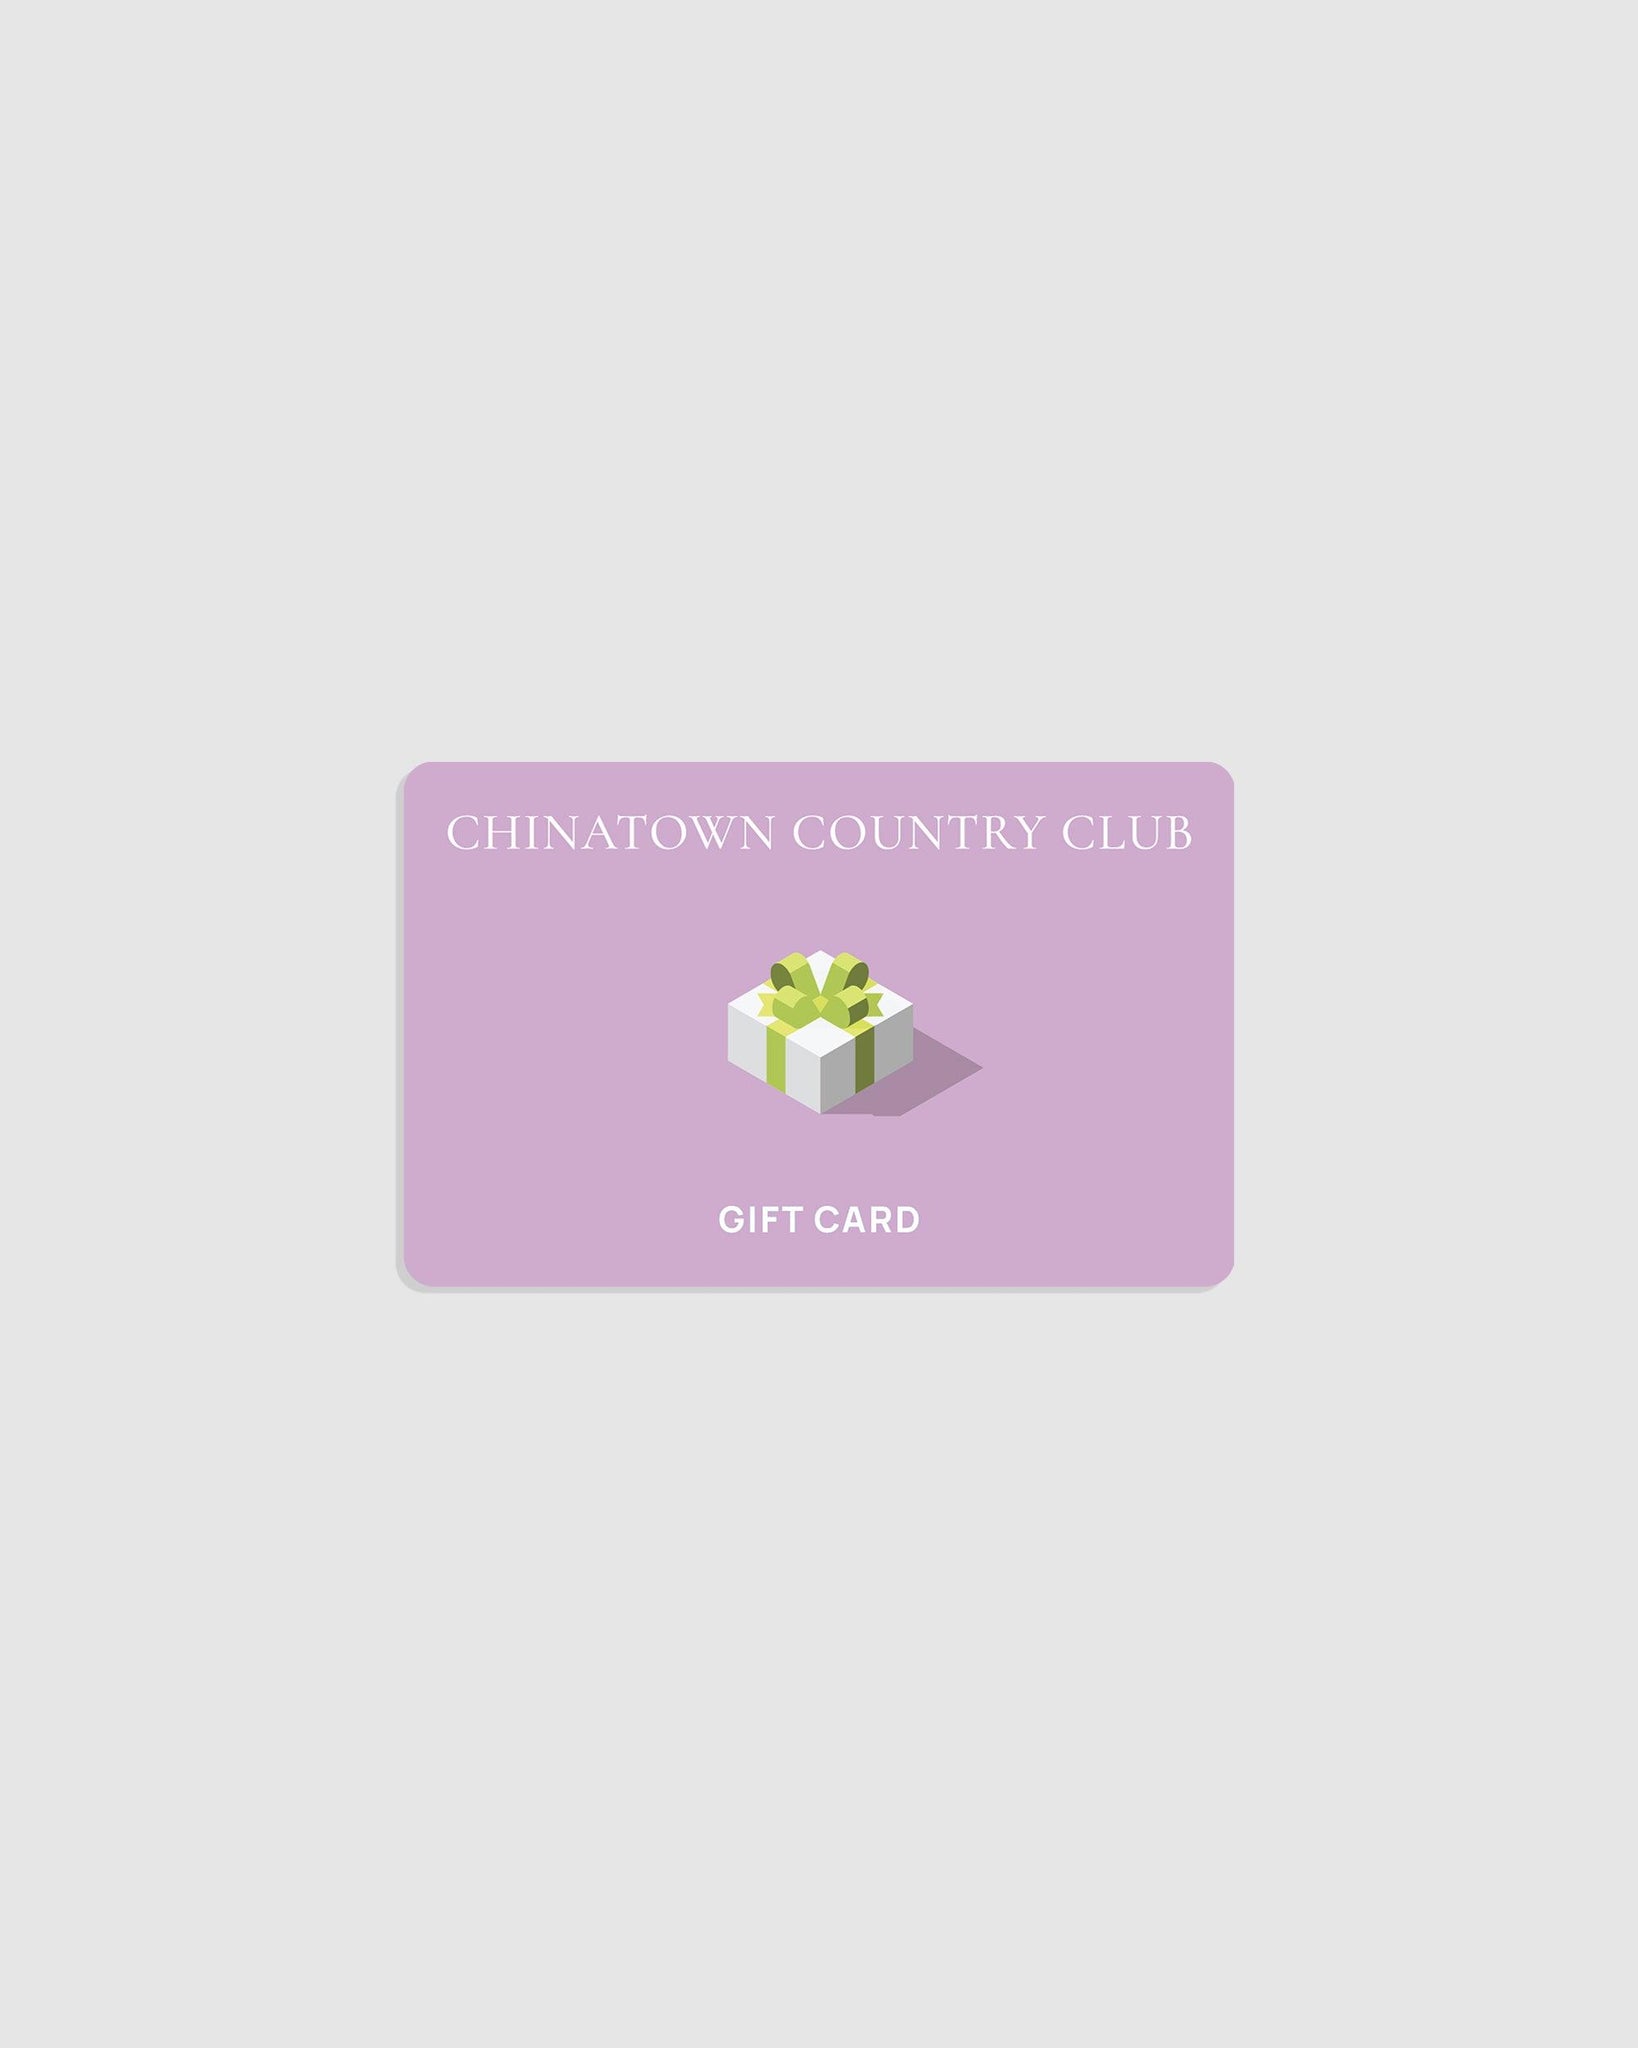 Chinatown Country Club Gift Card (Digital) - {{ collection.title }} - Chinatown Country Club 